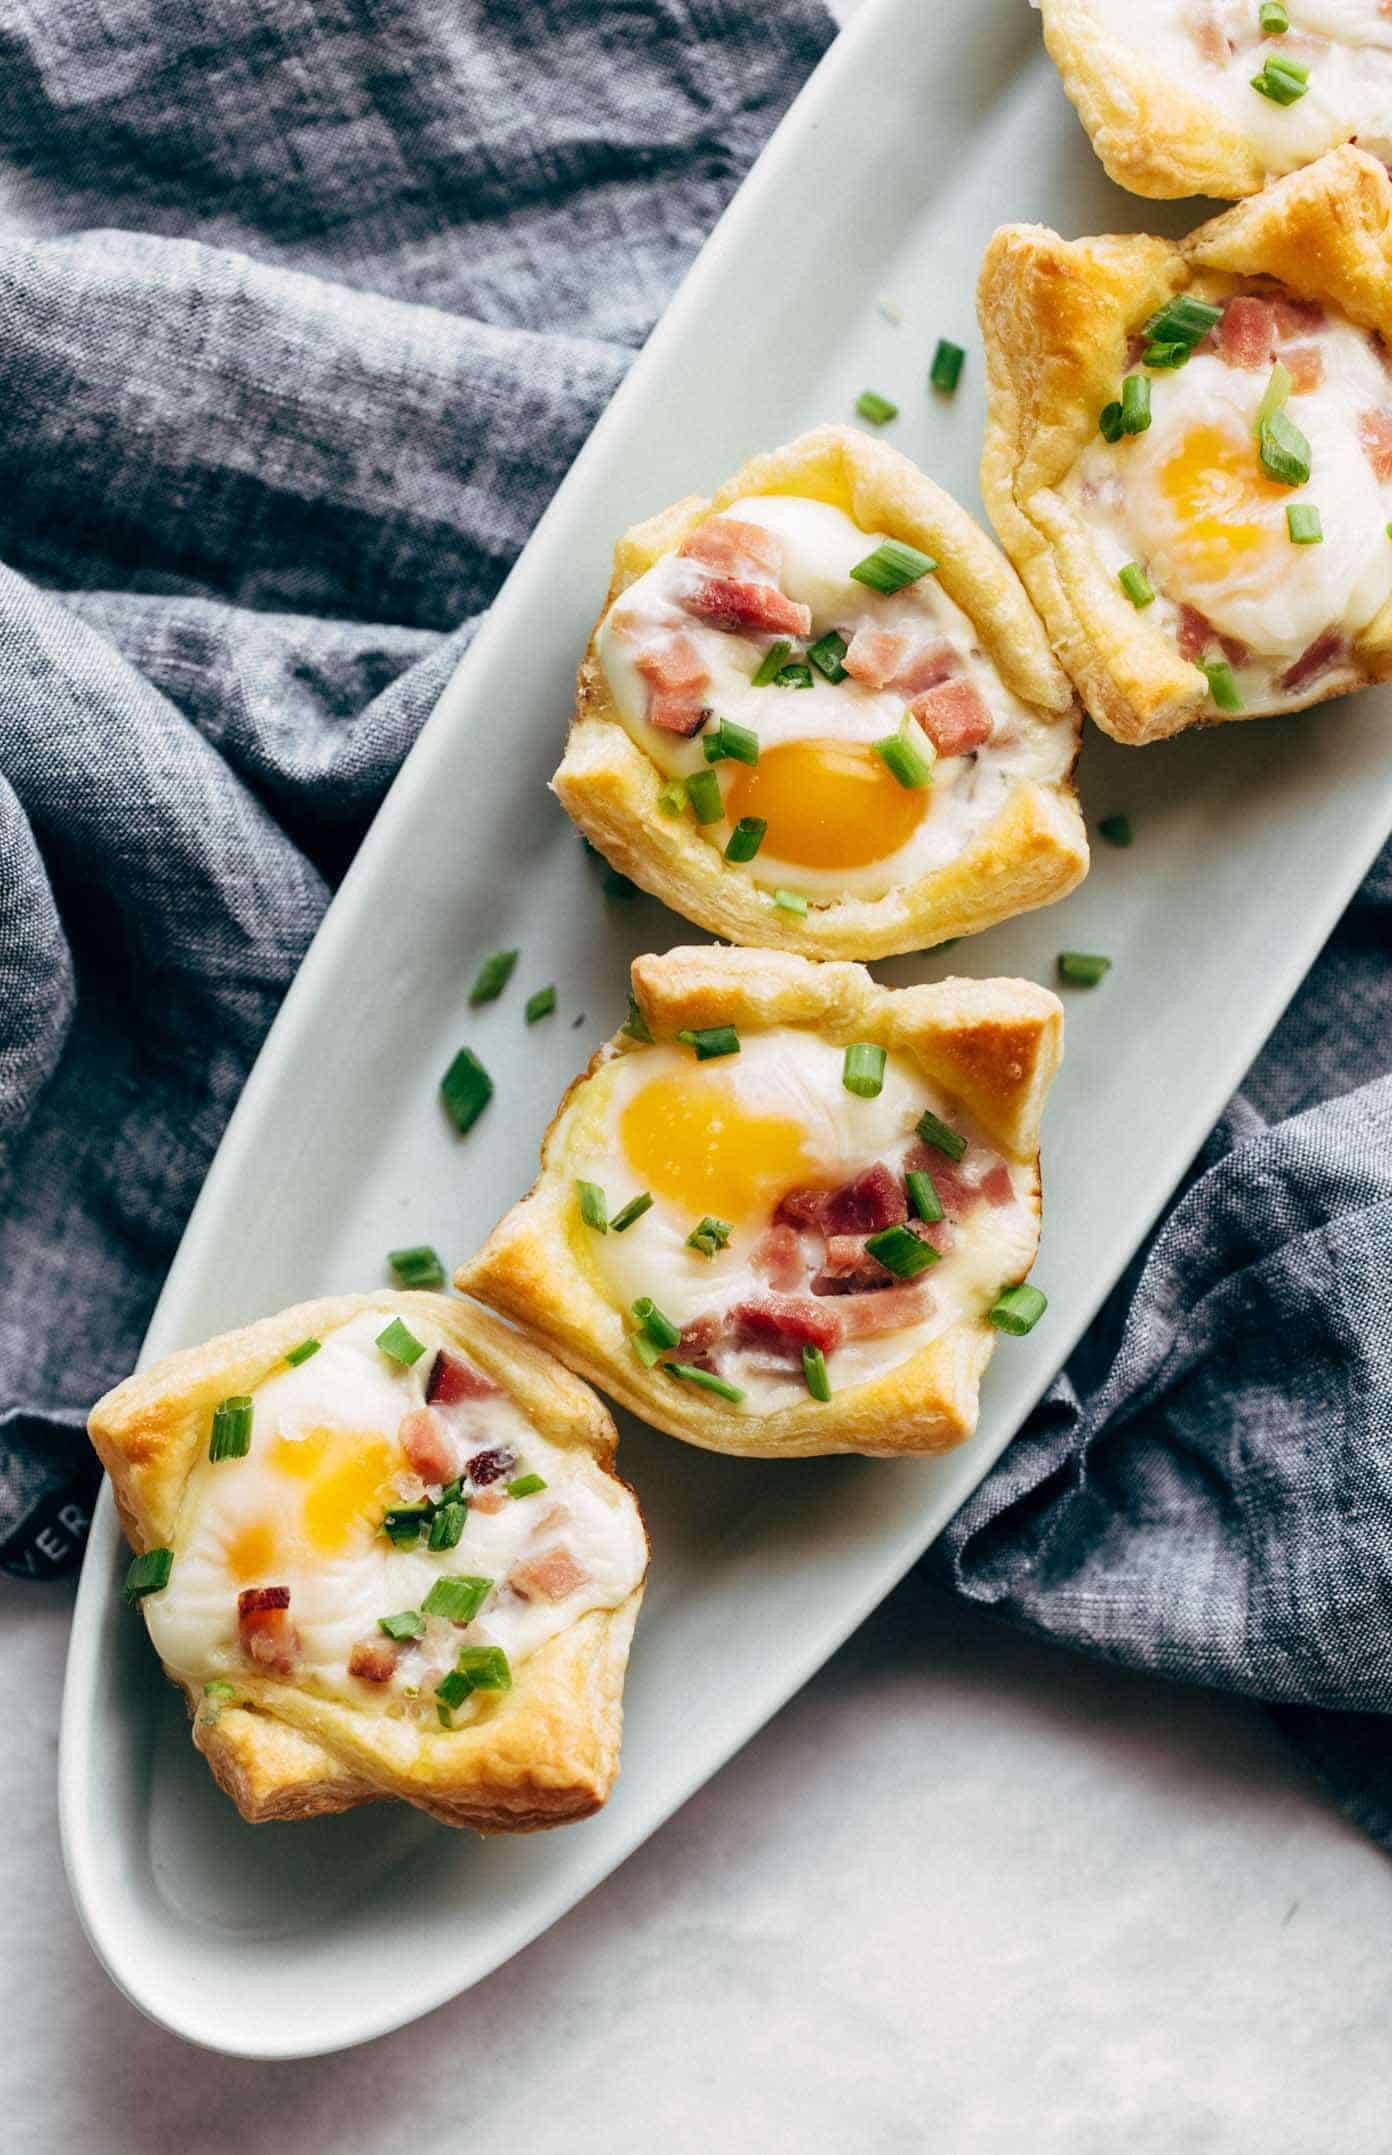 Ham, Egg, and Cheese Brunch Cups arranged on serving platter.